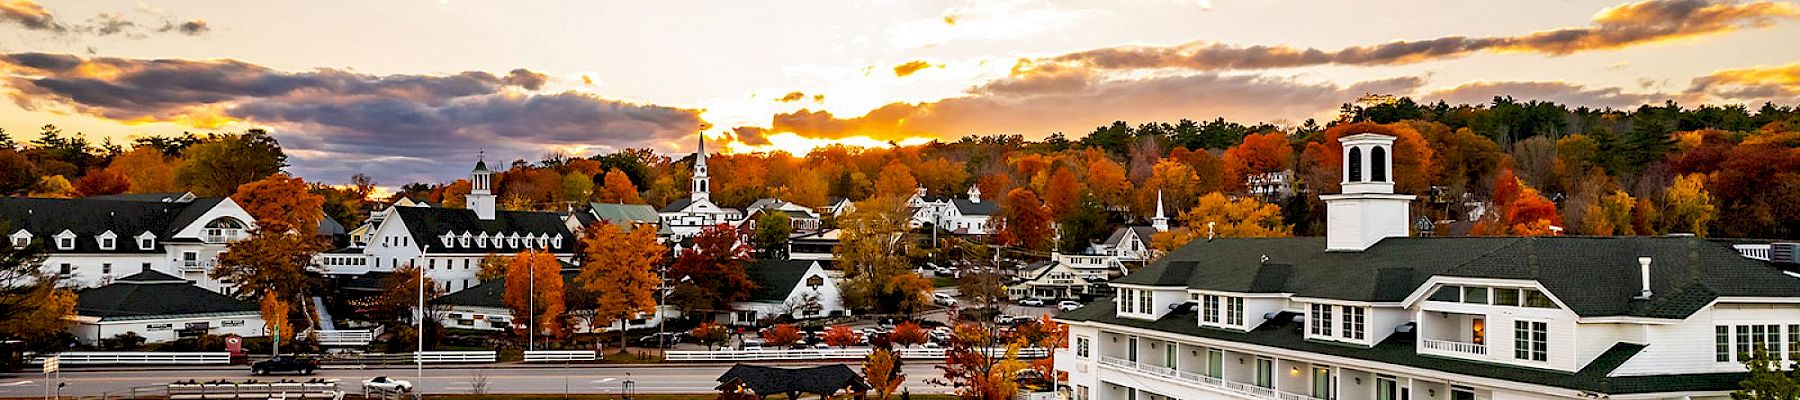 A picturesque lakeside town at sunset with autumn colors, featuring charming white buildings and a calm waterfront.